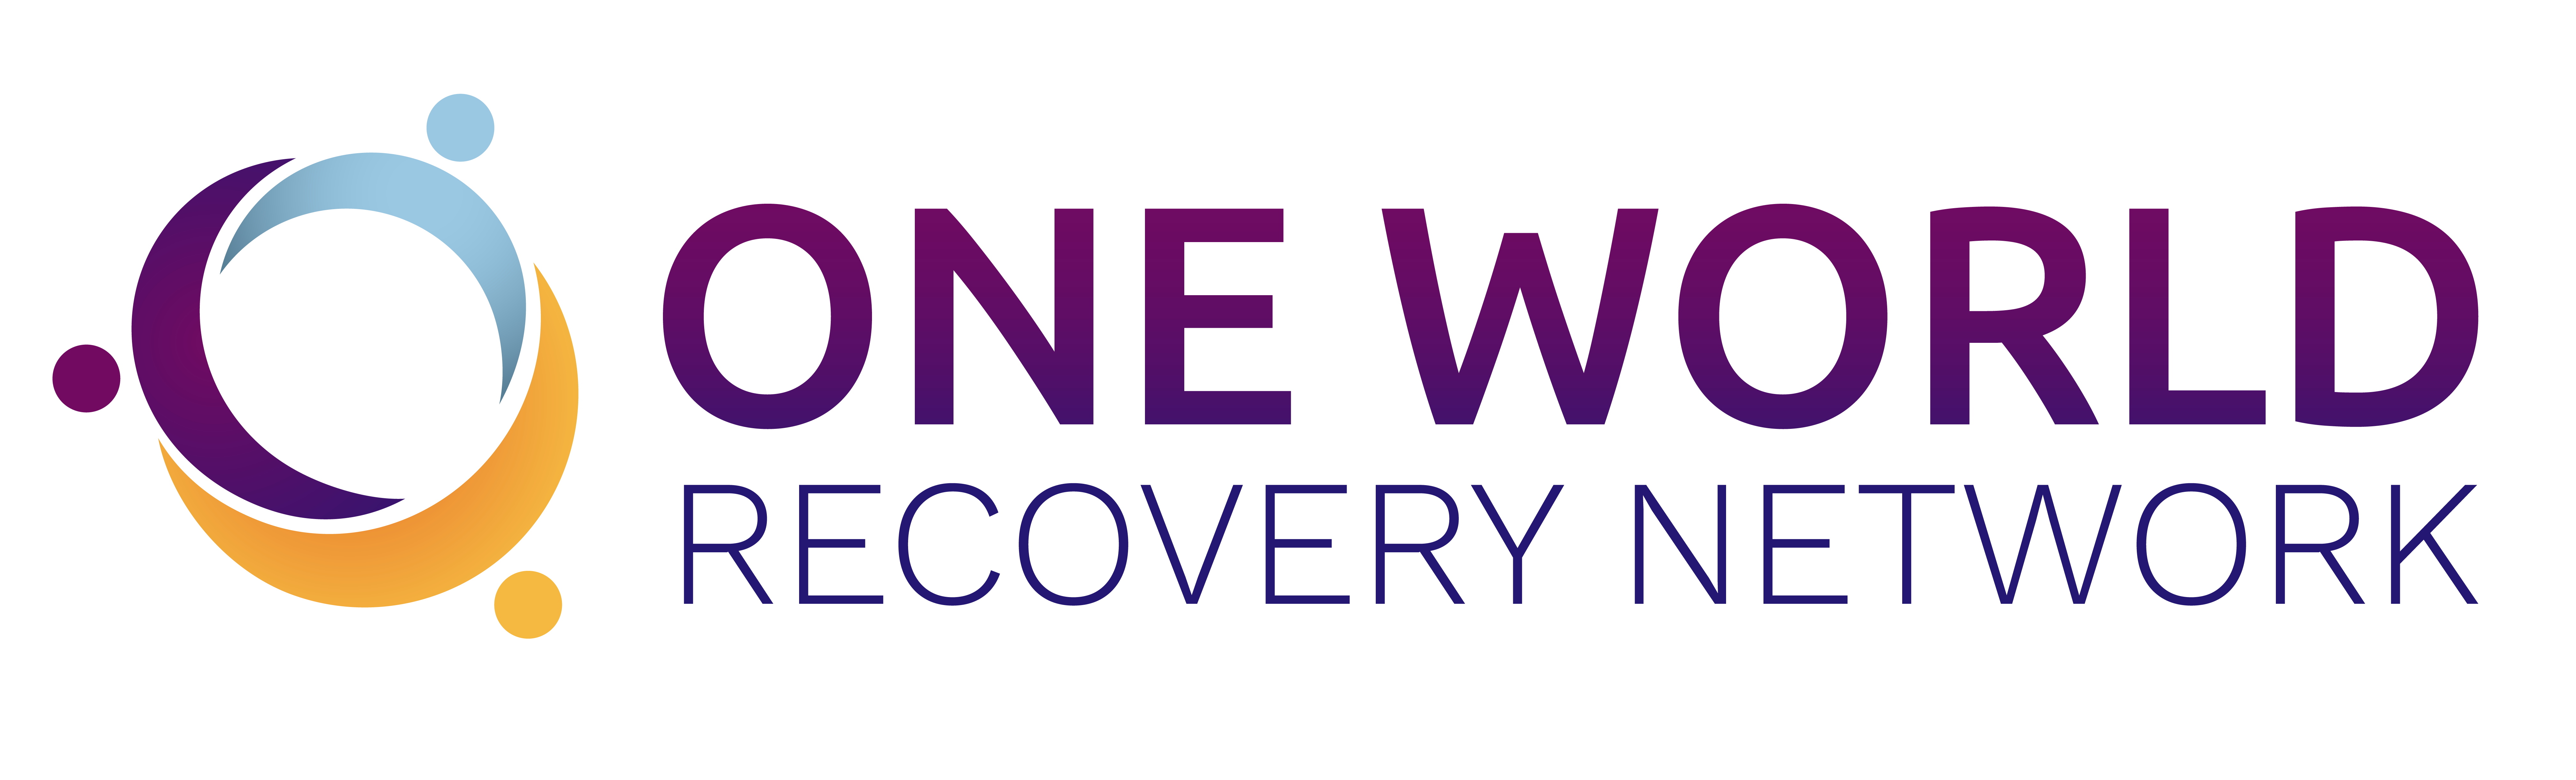 One World Recovery Network Logo (full color)